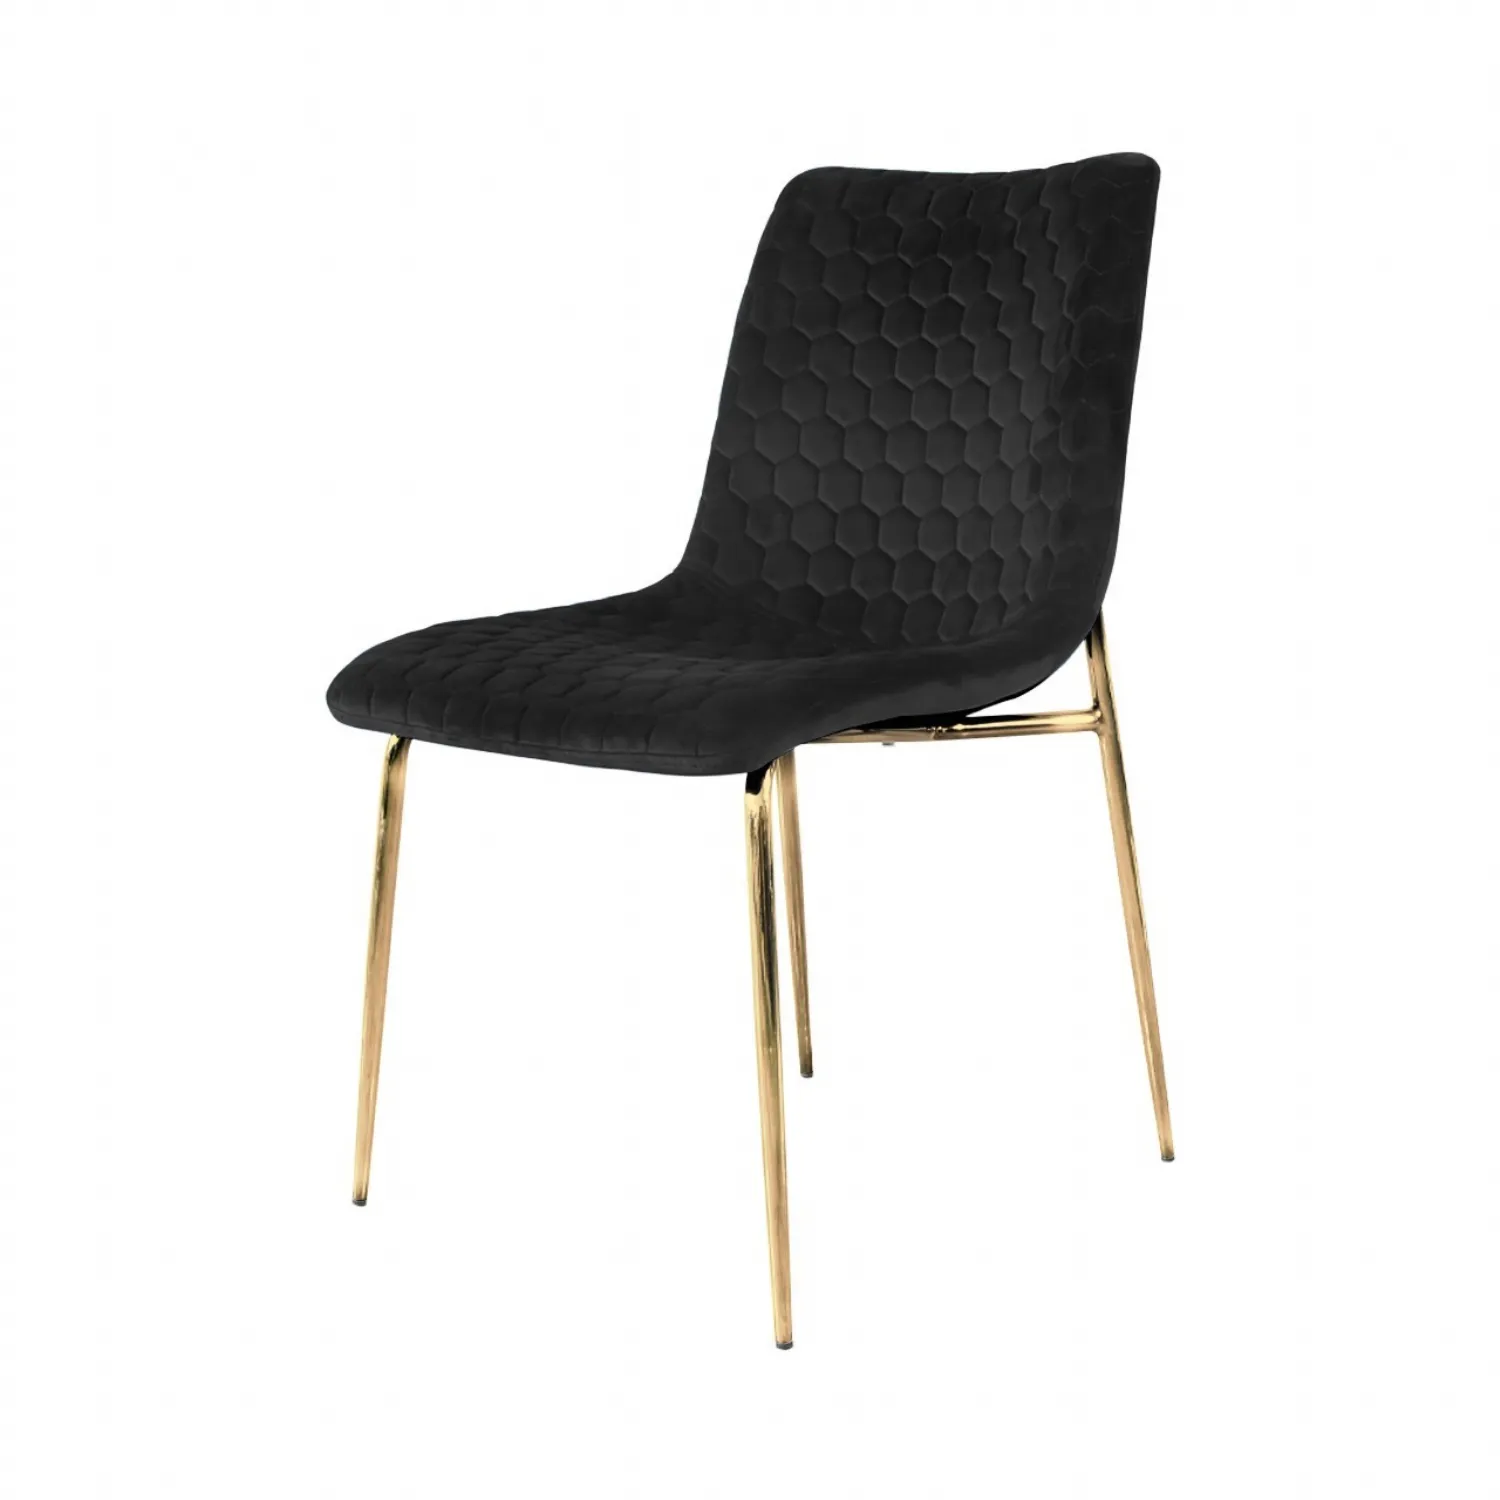 Zula Dining Chair Black With Gold Legs